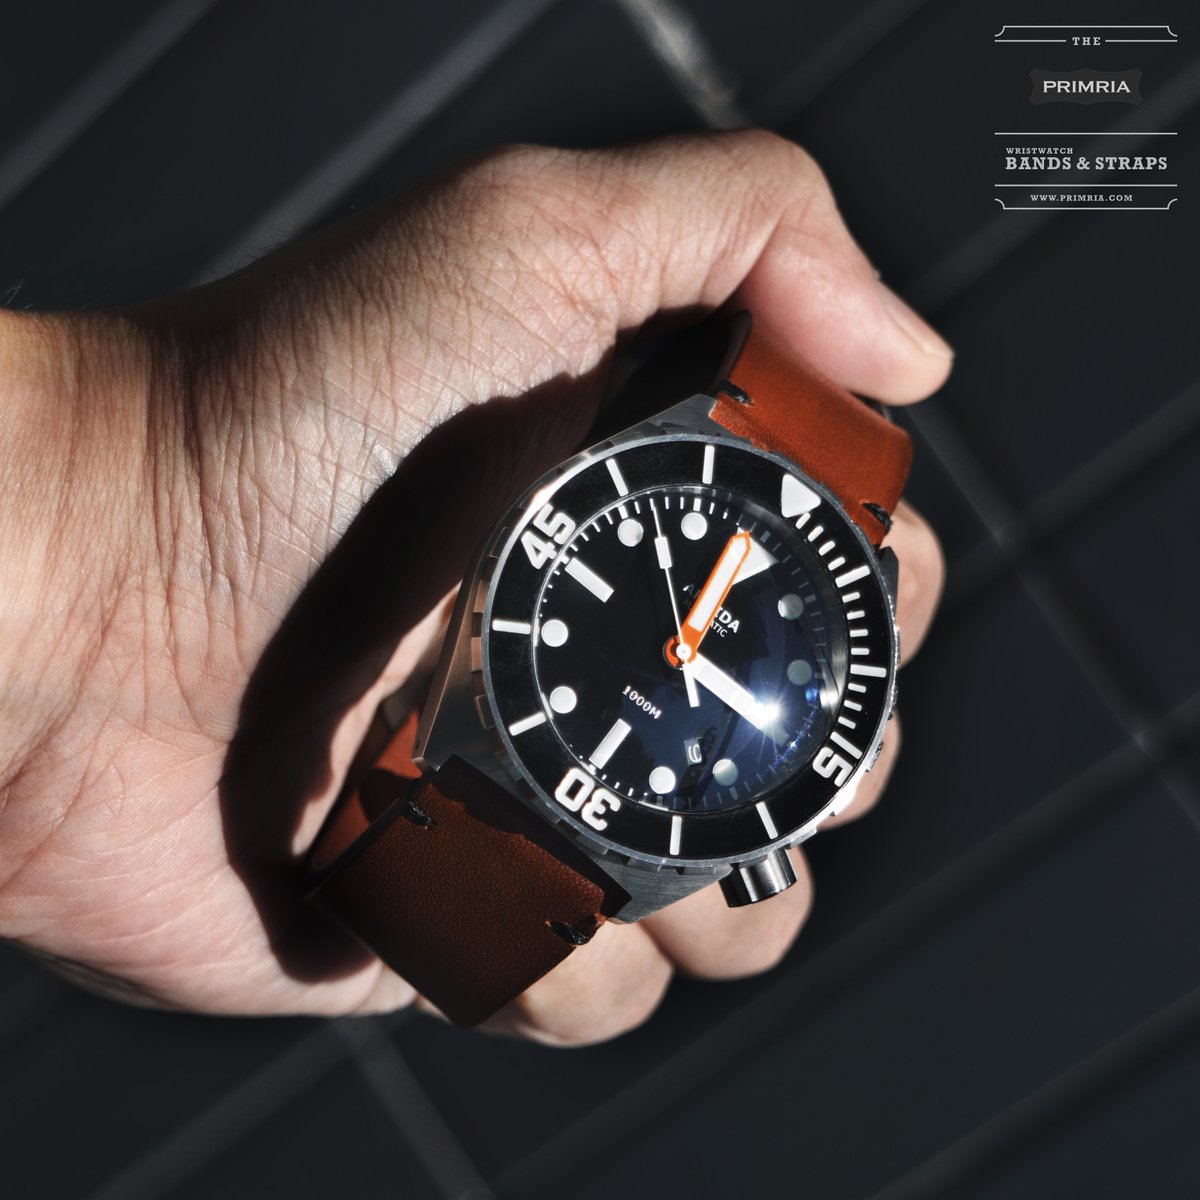 Ultimate in Comfort and Durability with a Thick-Cut Full Grain Leather Strap for Diver Watches 📷🔥
.
🛒 primria.com
🏠 9-year trusted - Watch Band Store
✈️ Free Shipping Worldwide
.
.
#diverwatch
#leatherwatchstrap
#fullgrainleather
#watchaccessories #watchstrap